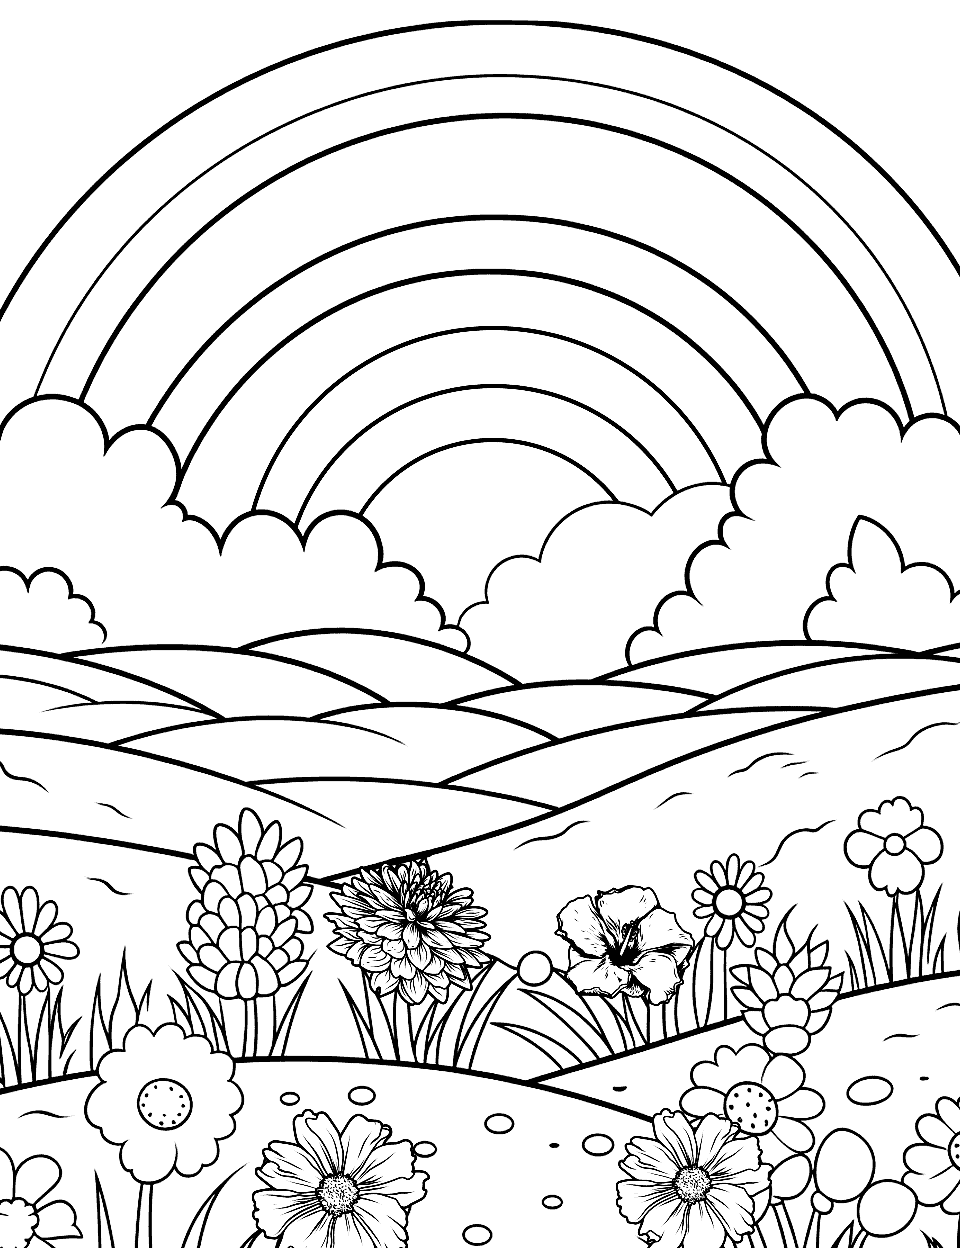 Rainbow Over a Flower Field Coloring Page - A vibrant rainbow arching over a field of wildflowers.